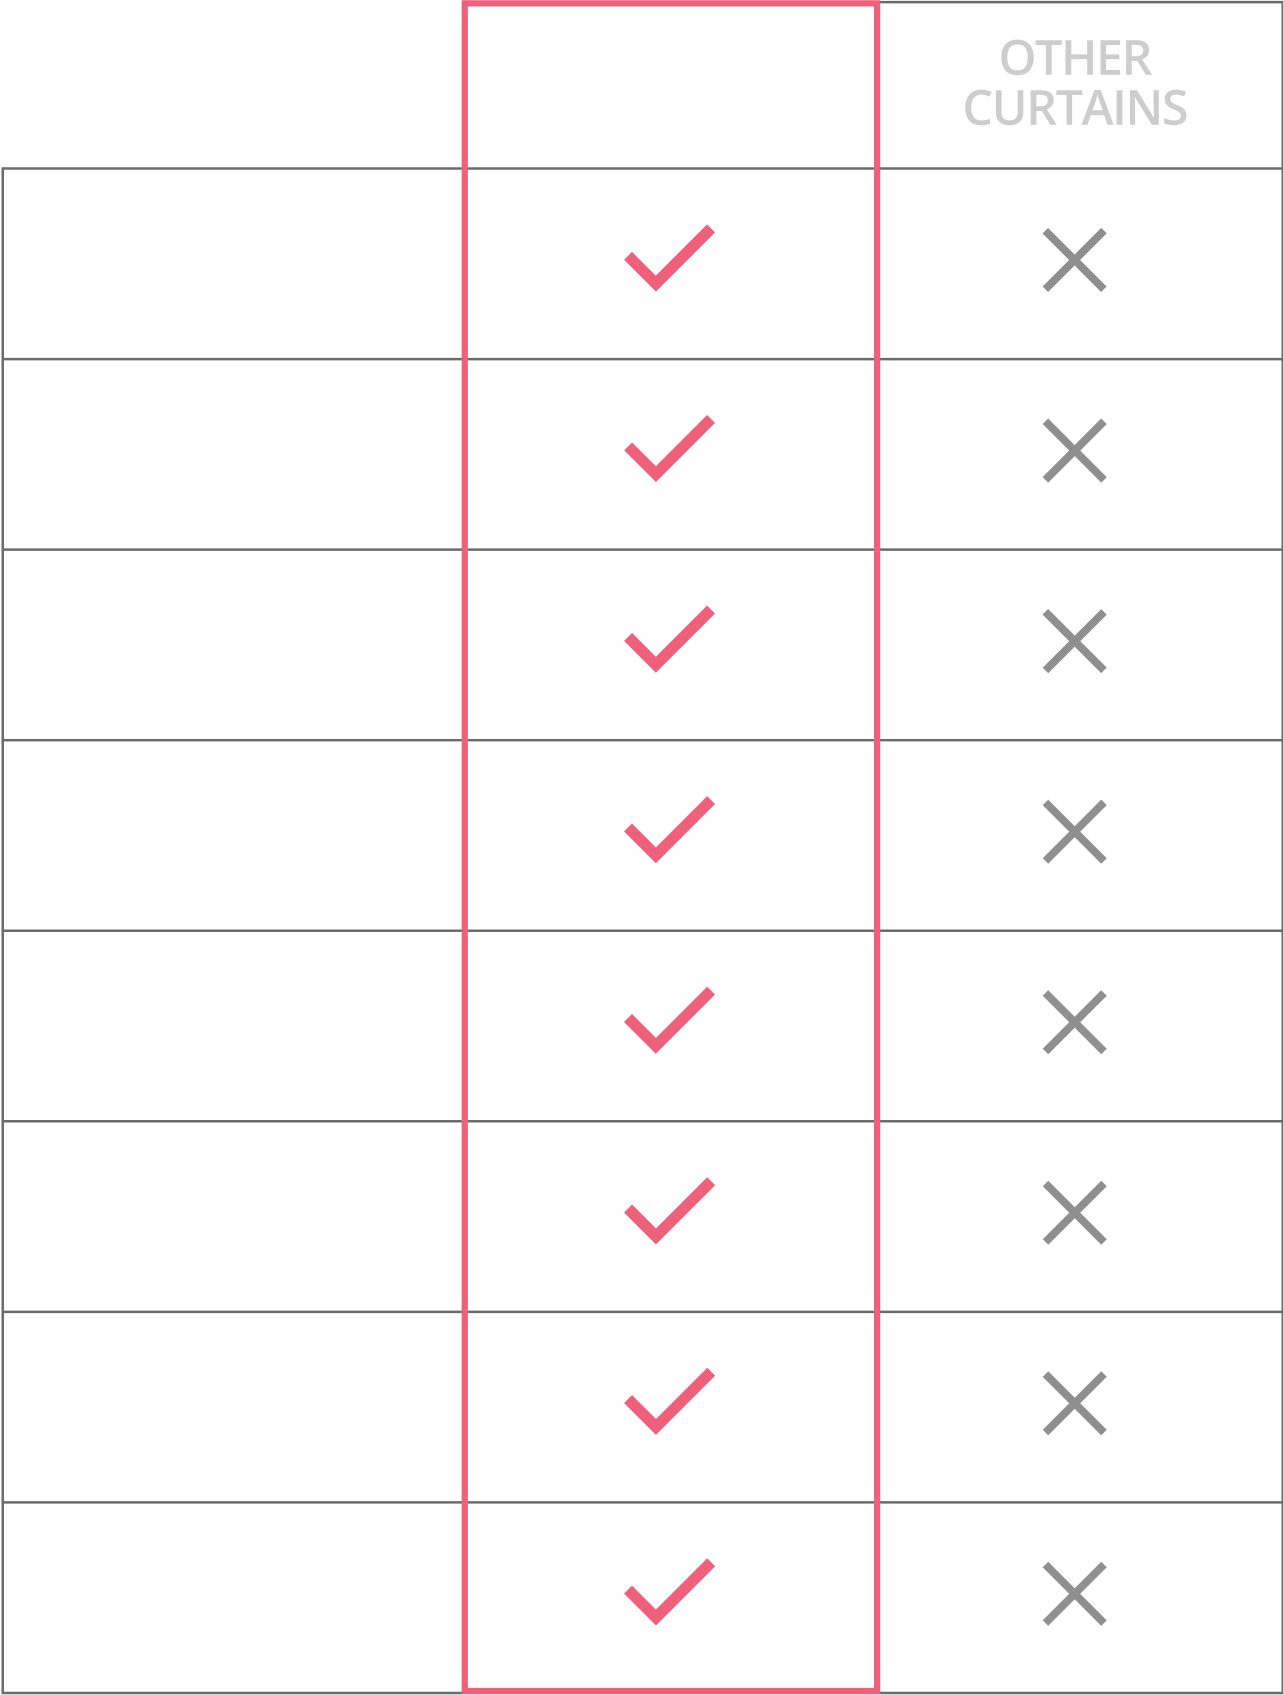 Comparison chart showing Obscura vs. other curtains